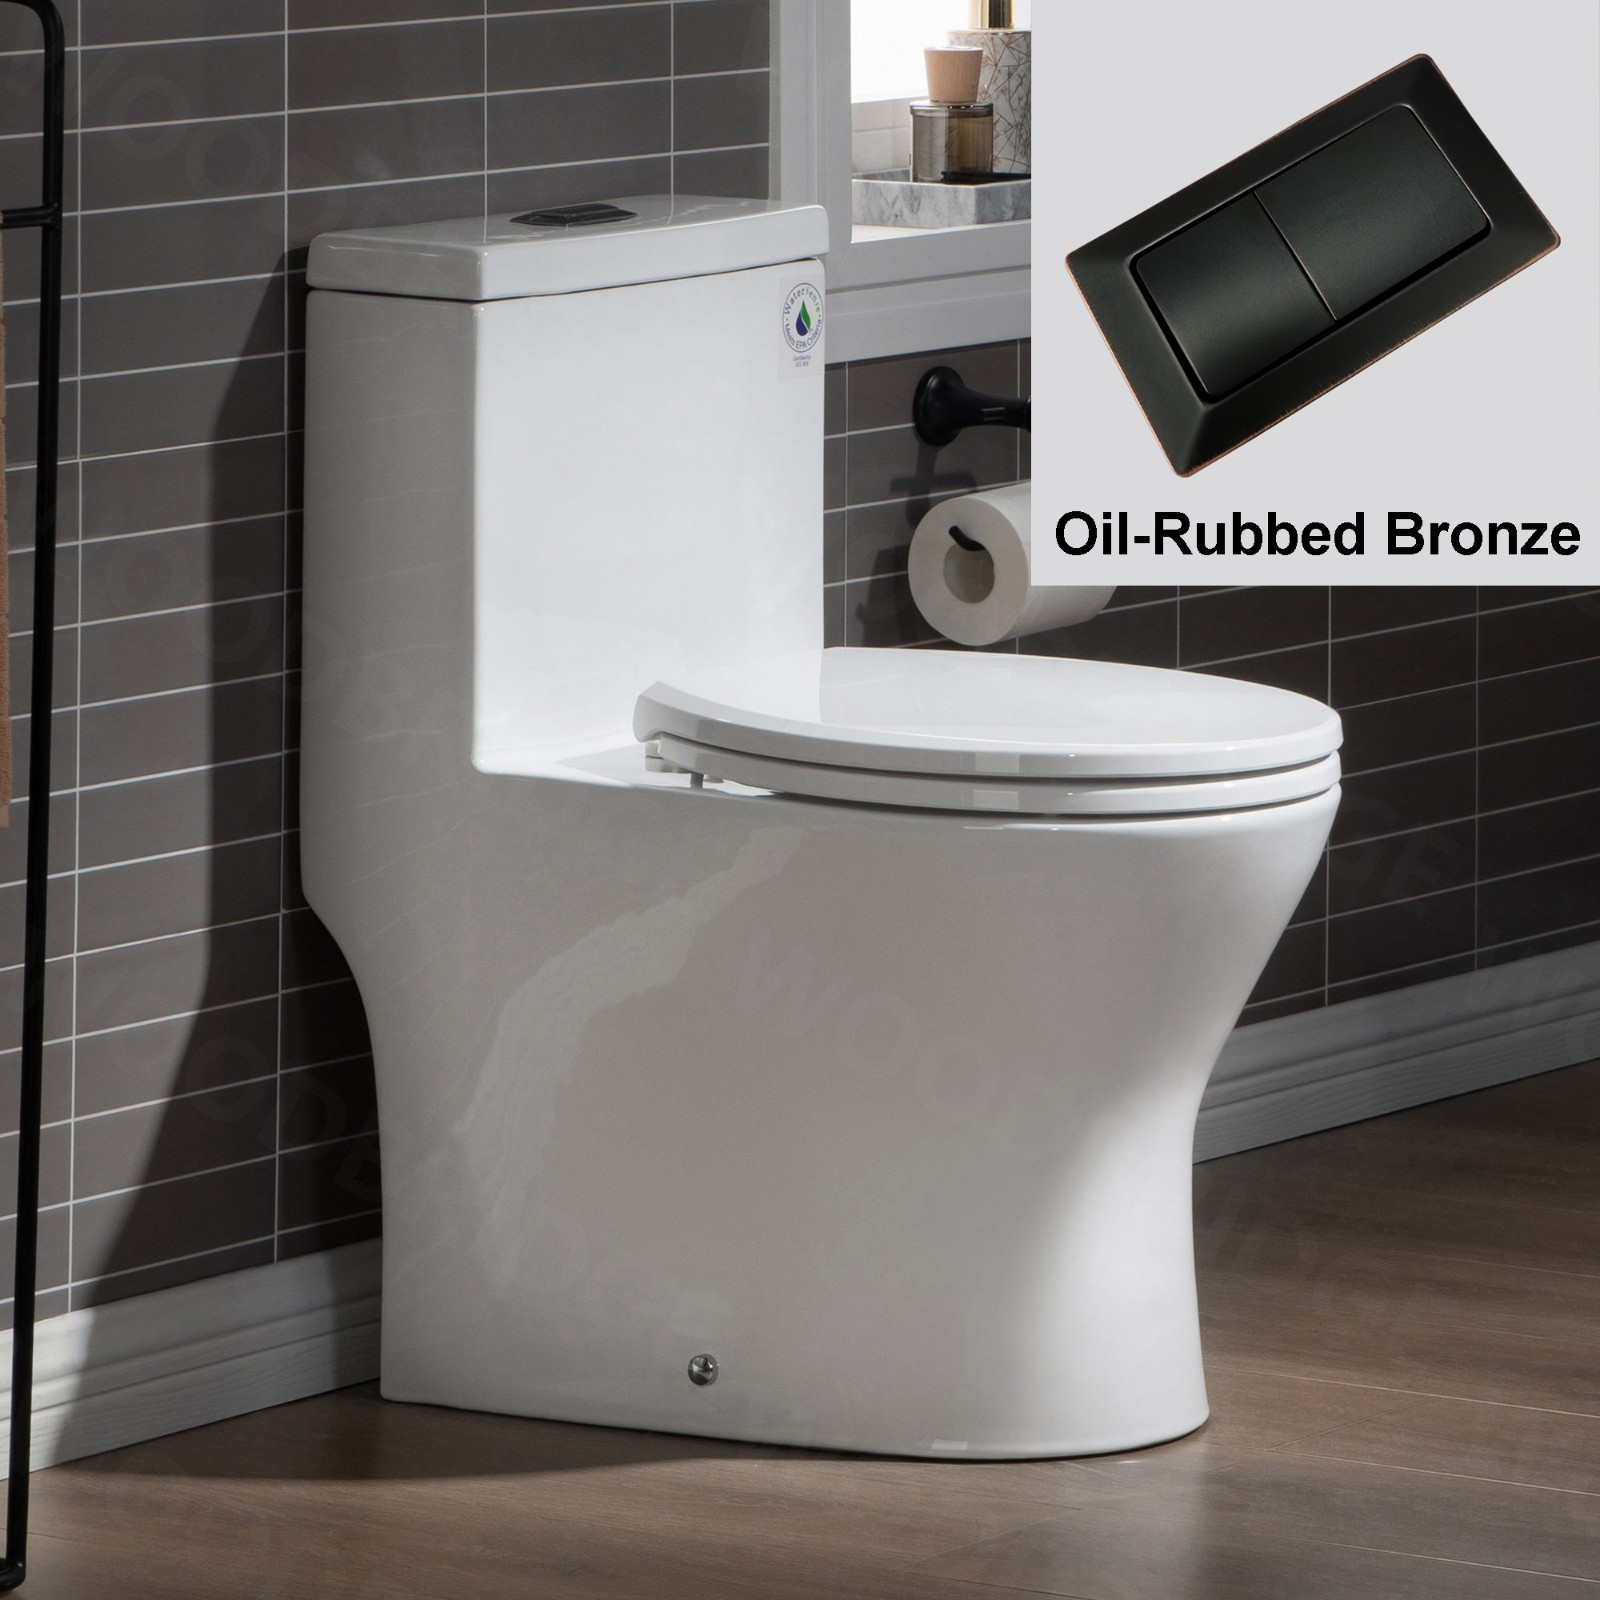  WOODBRIDGE One Piece Short Compact Bathroom Tiny Mini Commode Water Closet Dual Flush Concealed Trapway, Oil Rubbed Bronze Button B0500-ORB, White_5643